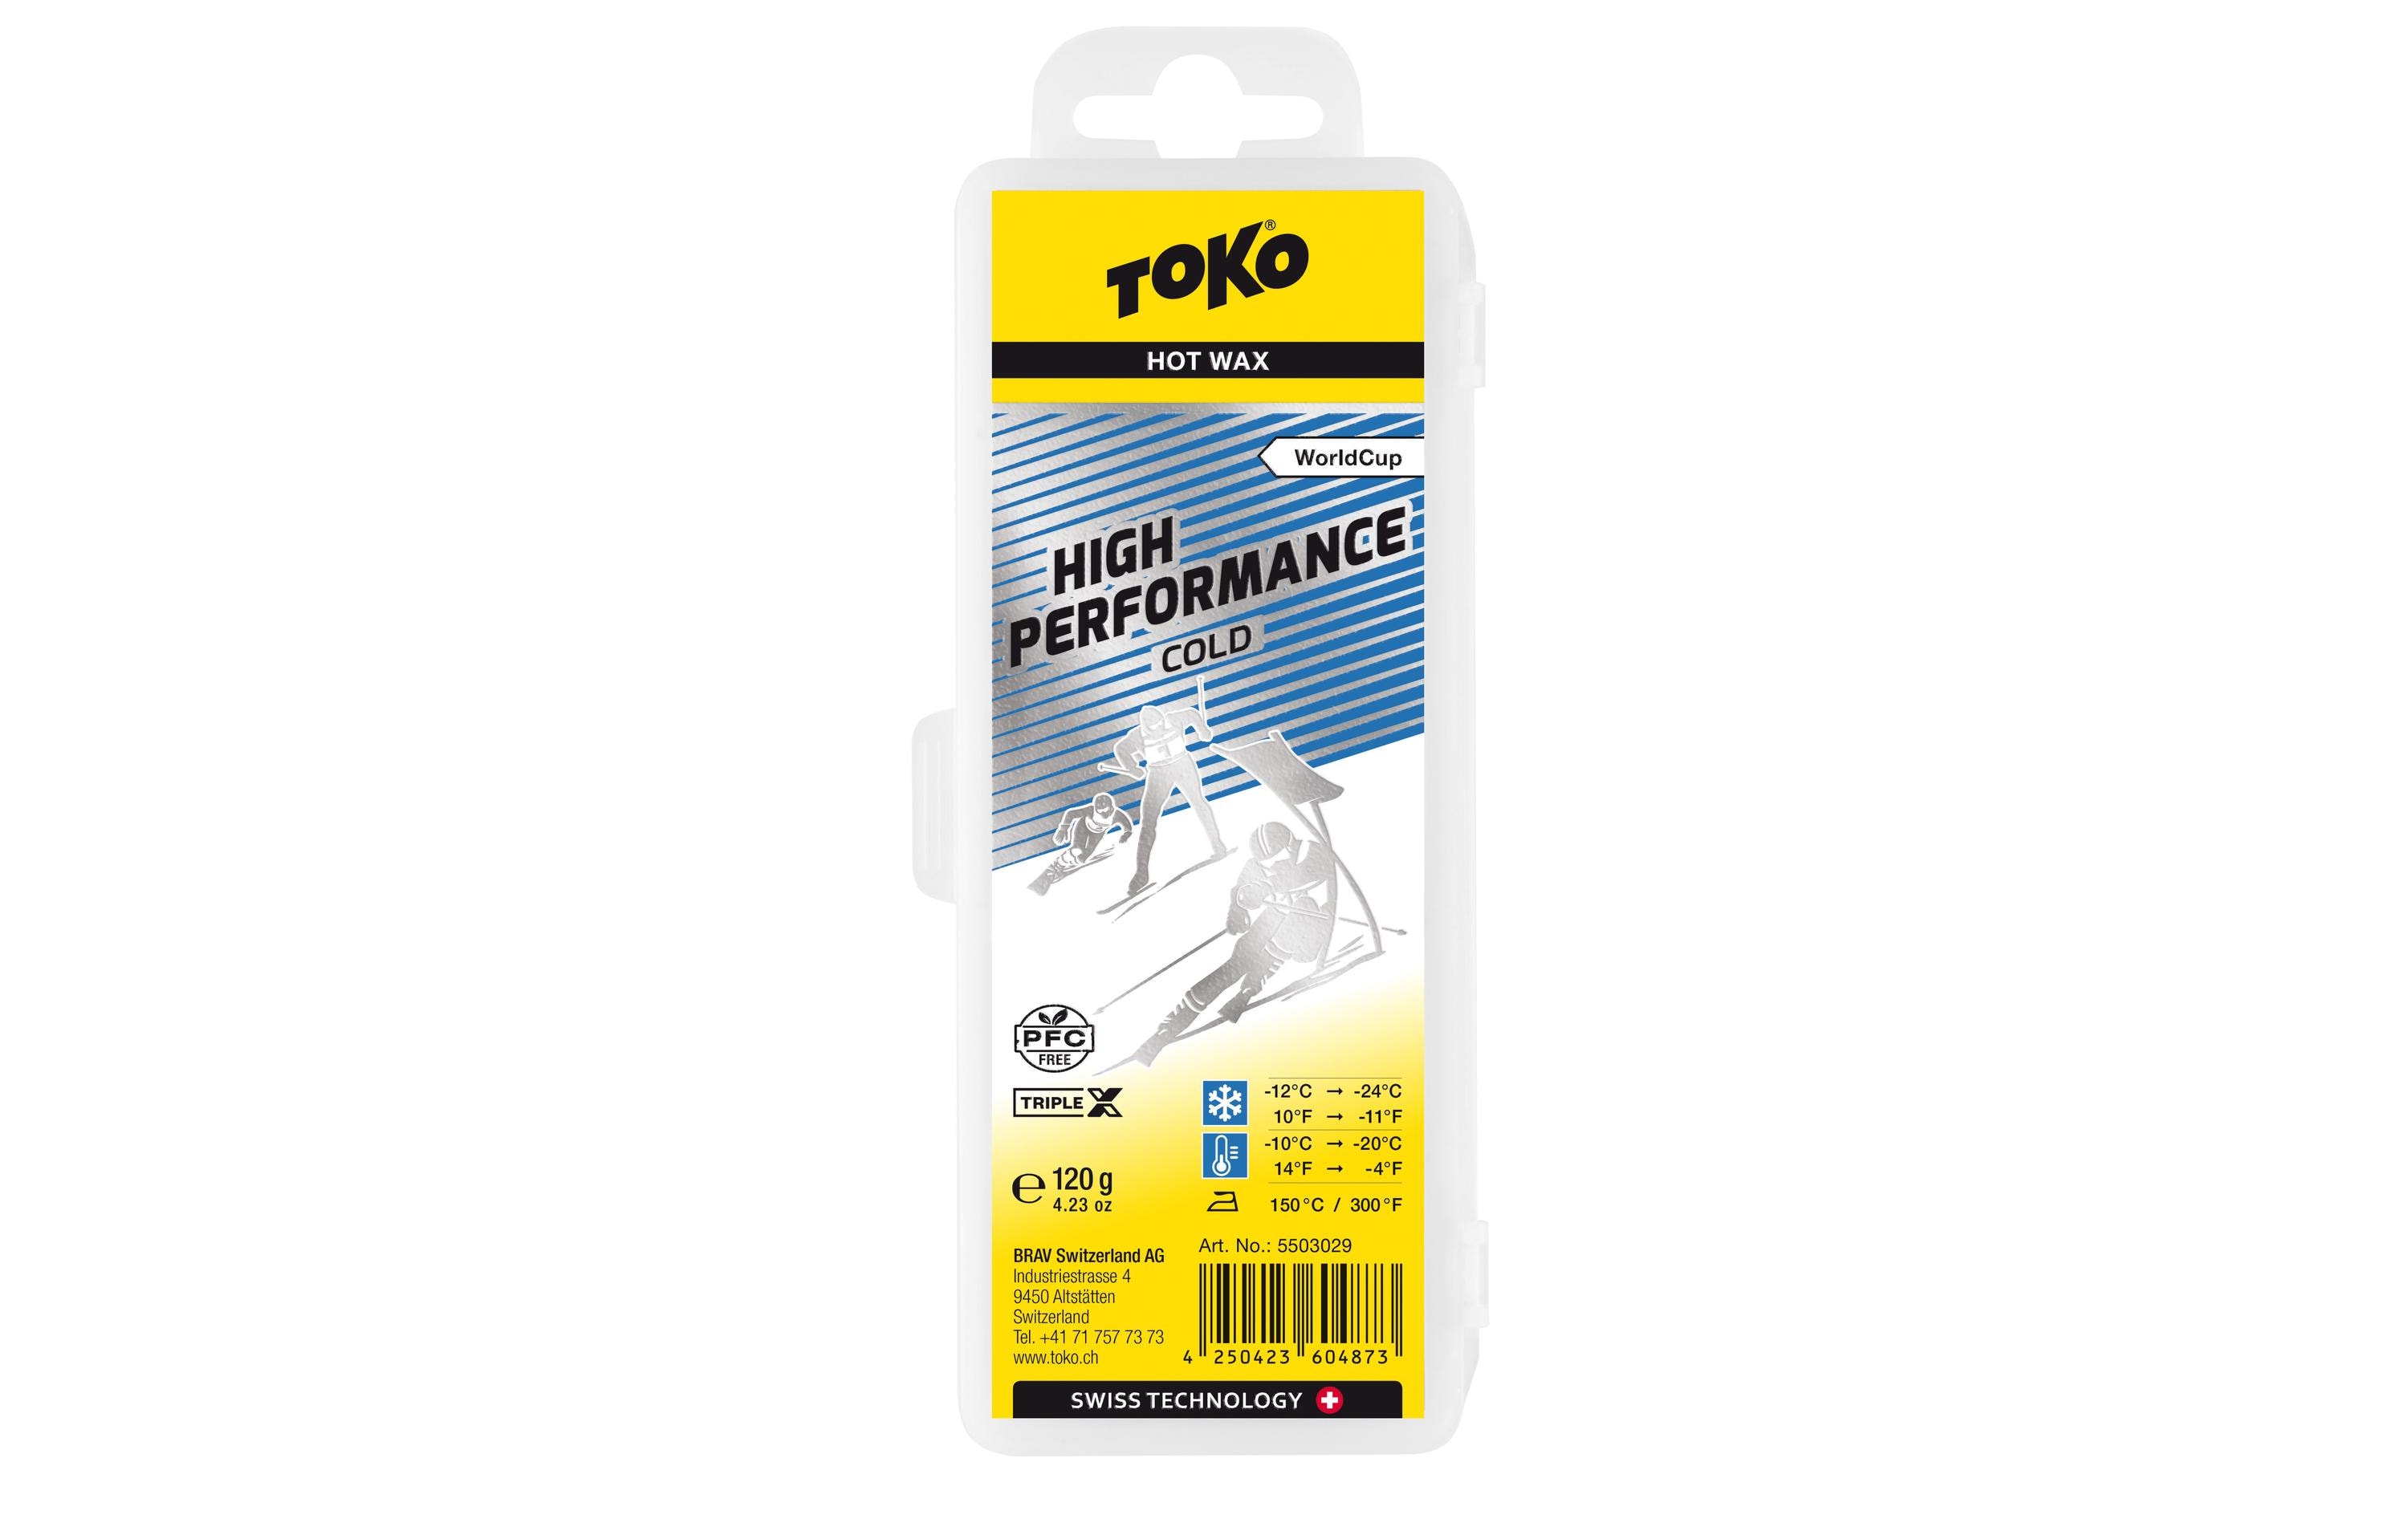 TOKO Wax World Cup High Performance Cold 120 g